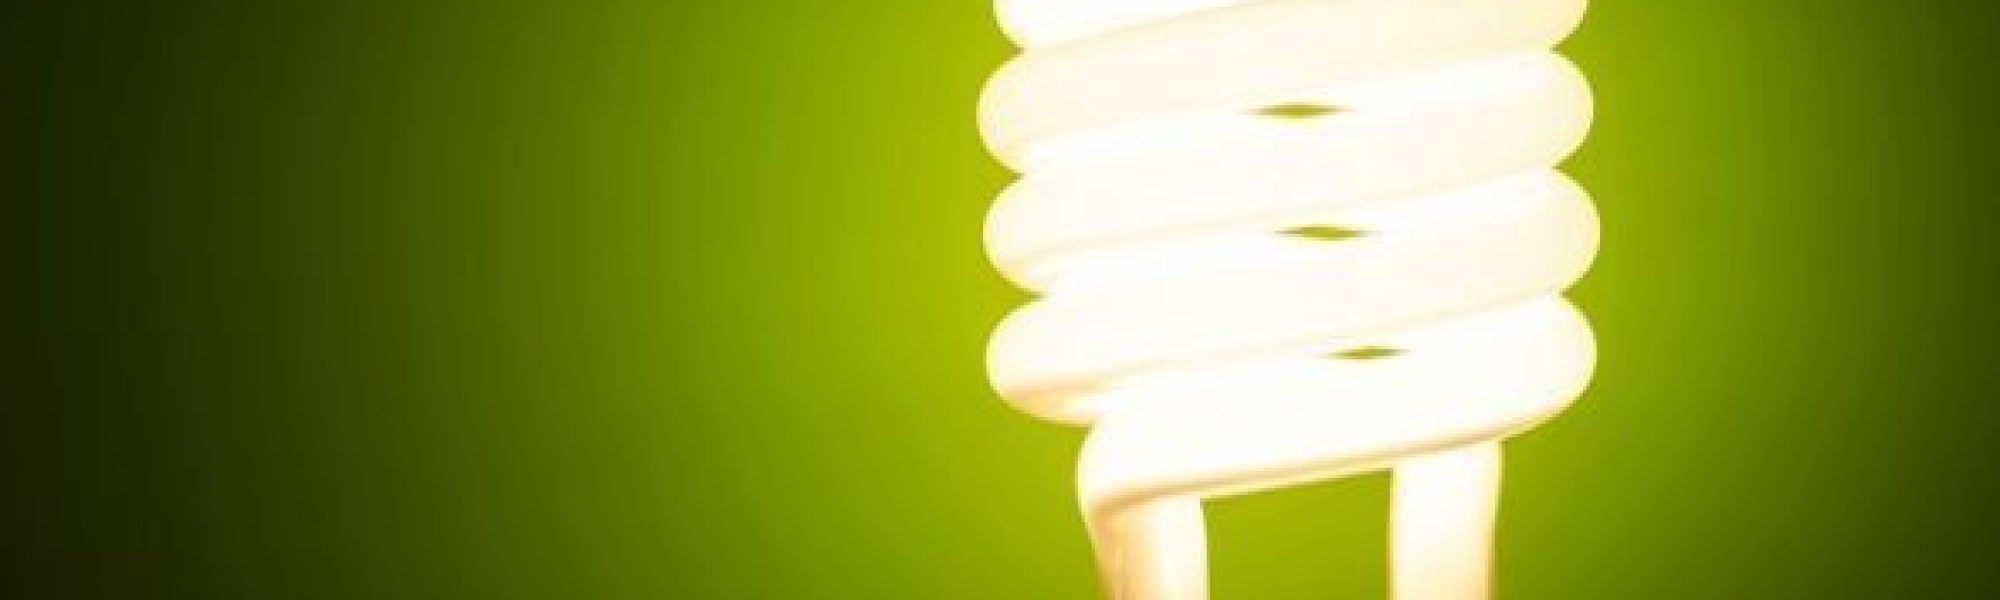 Federal government opens “discussion” on a national energy efficiency strategy